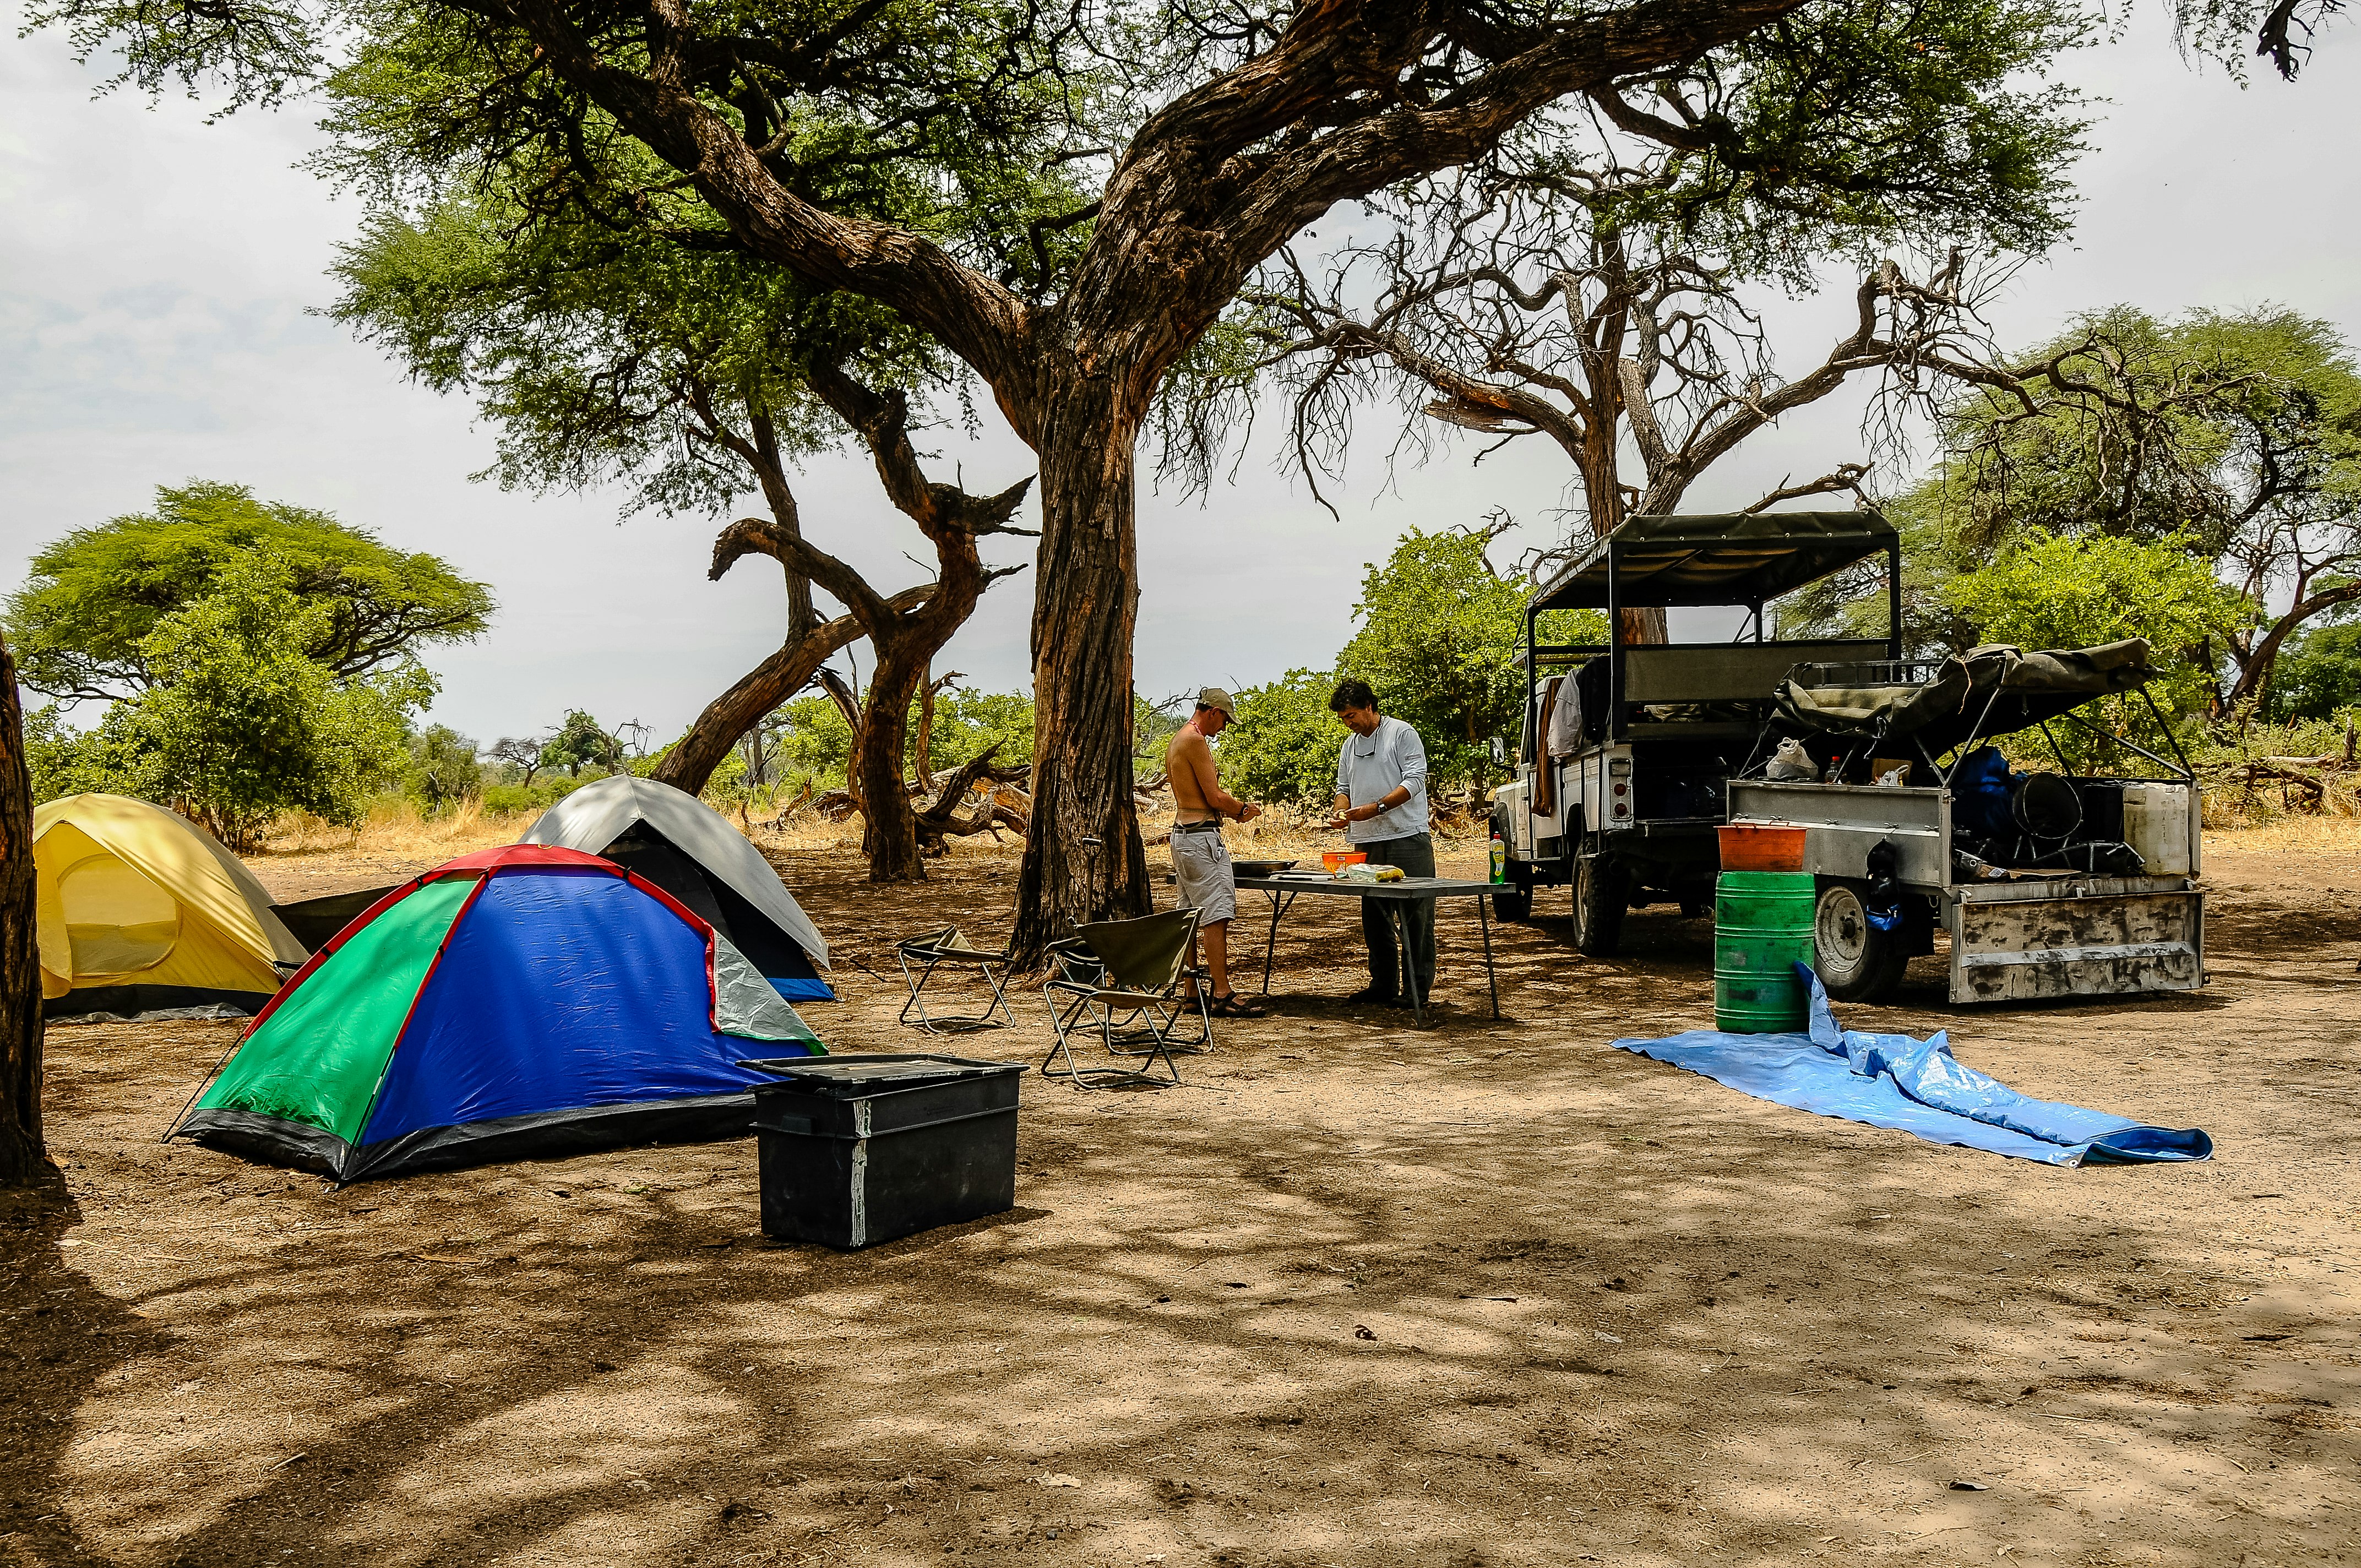 Two travelers prepare lunch after preparing a tent camp in Chobe National Park, Botswana, Africa